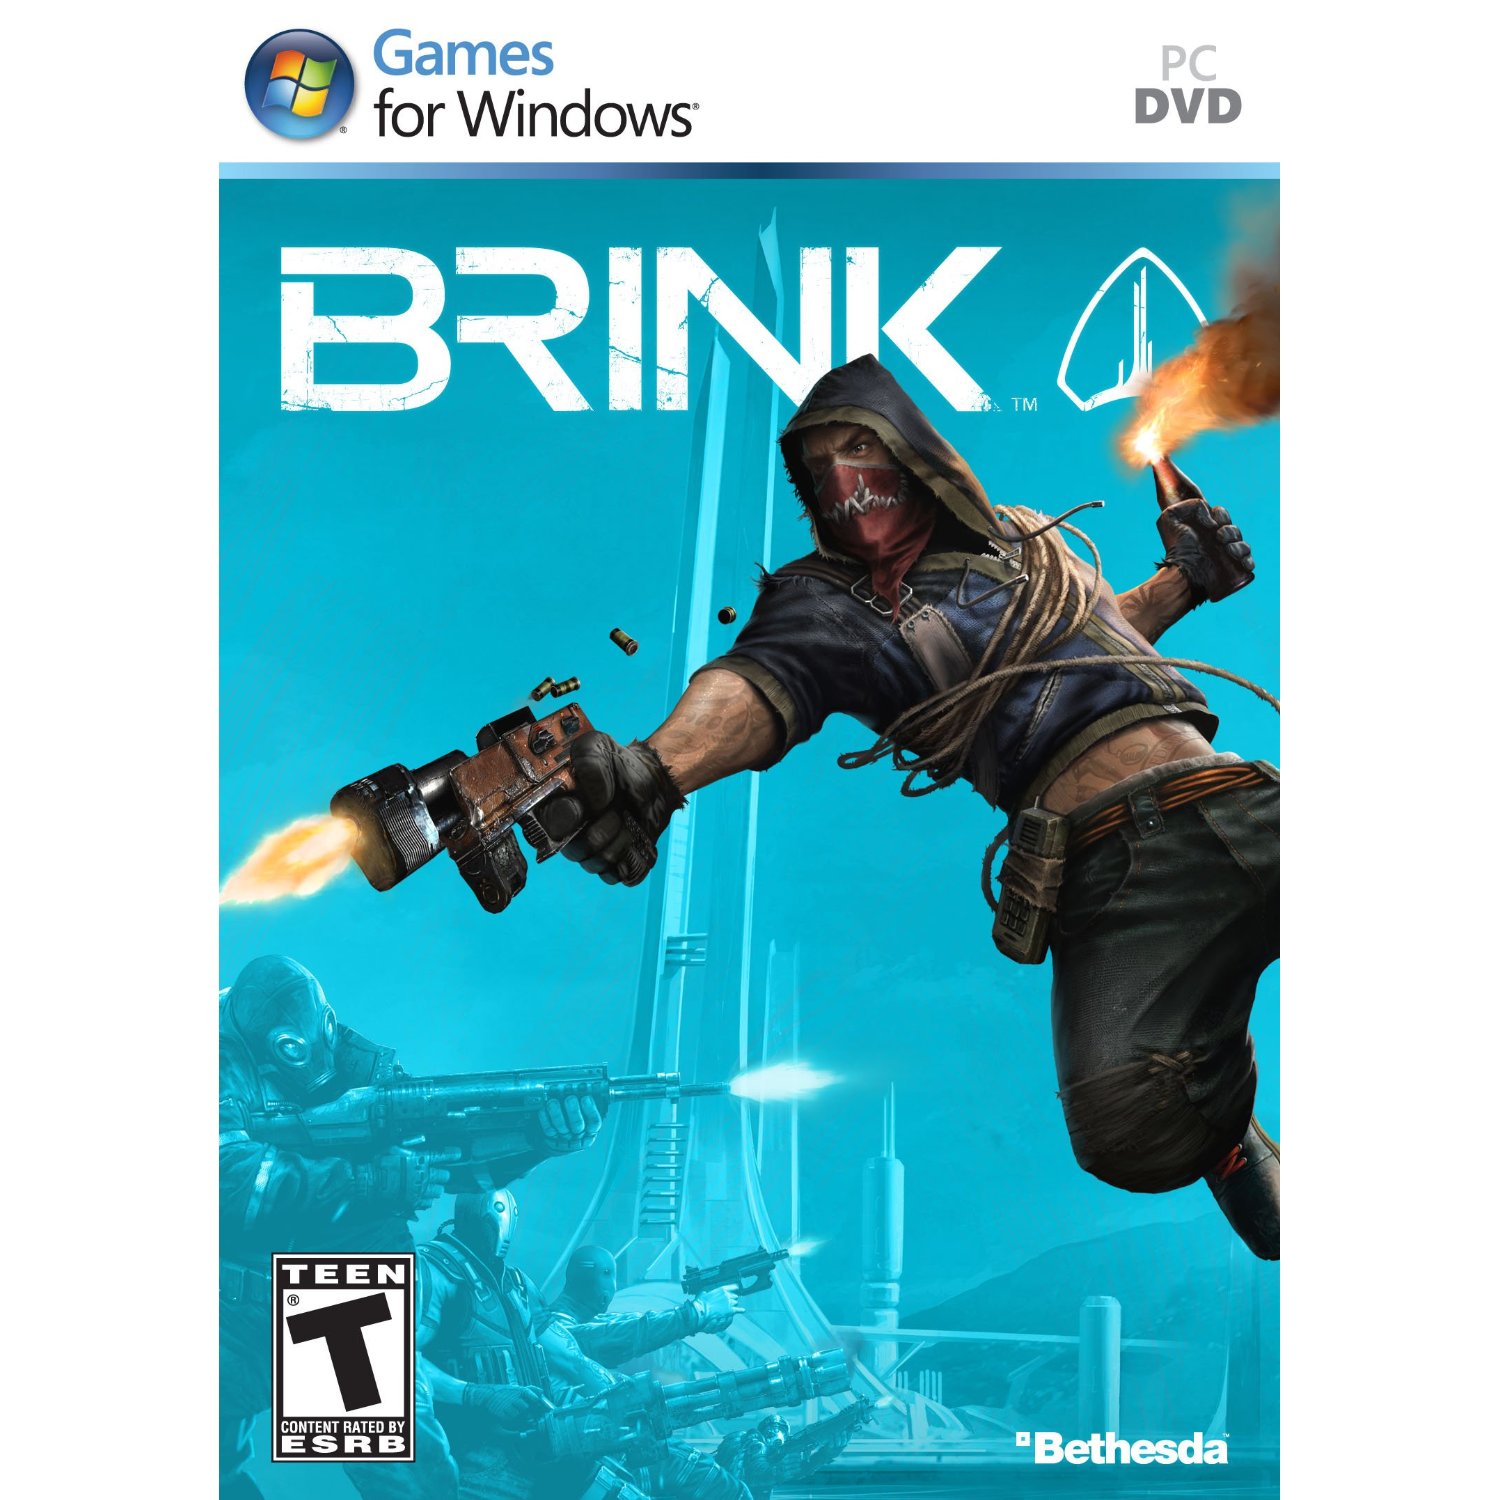 http://thetechjournal.com/wp-content/uploads/images/1110/1319105682-brink--game-for-pc-1.jpg